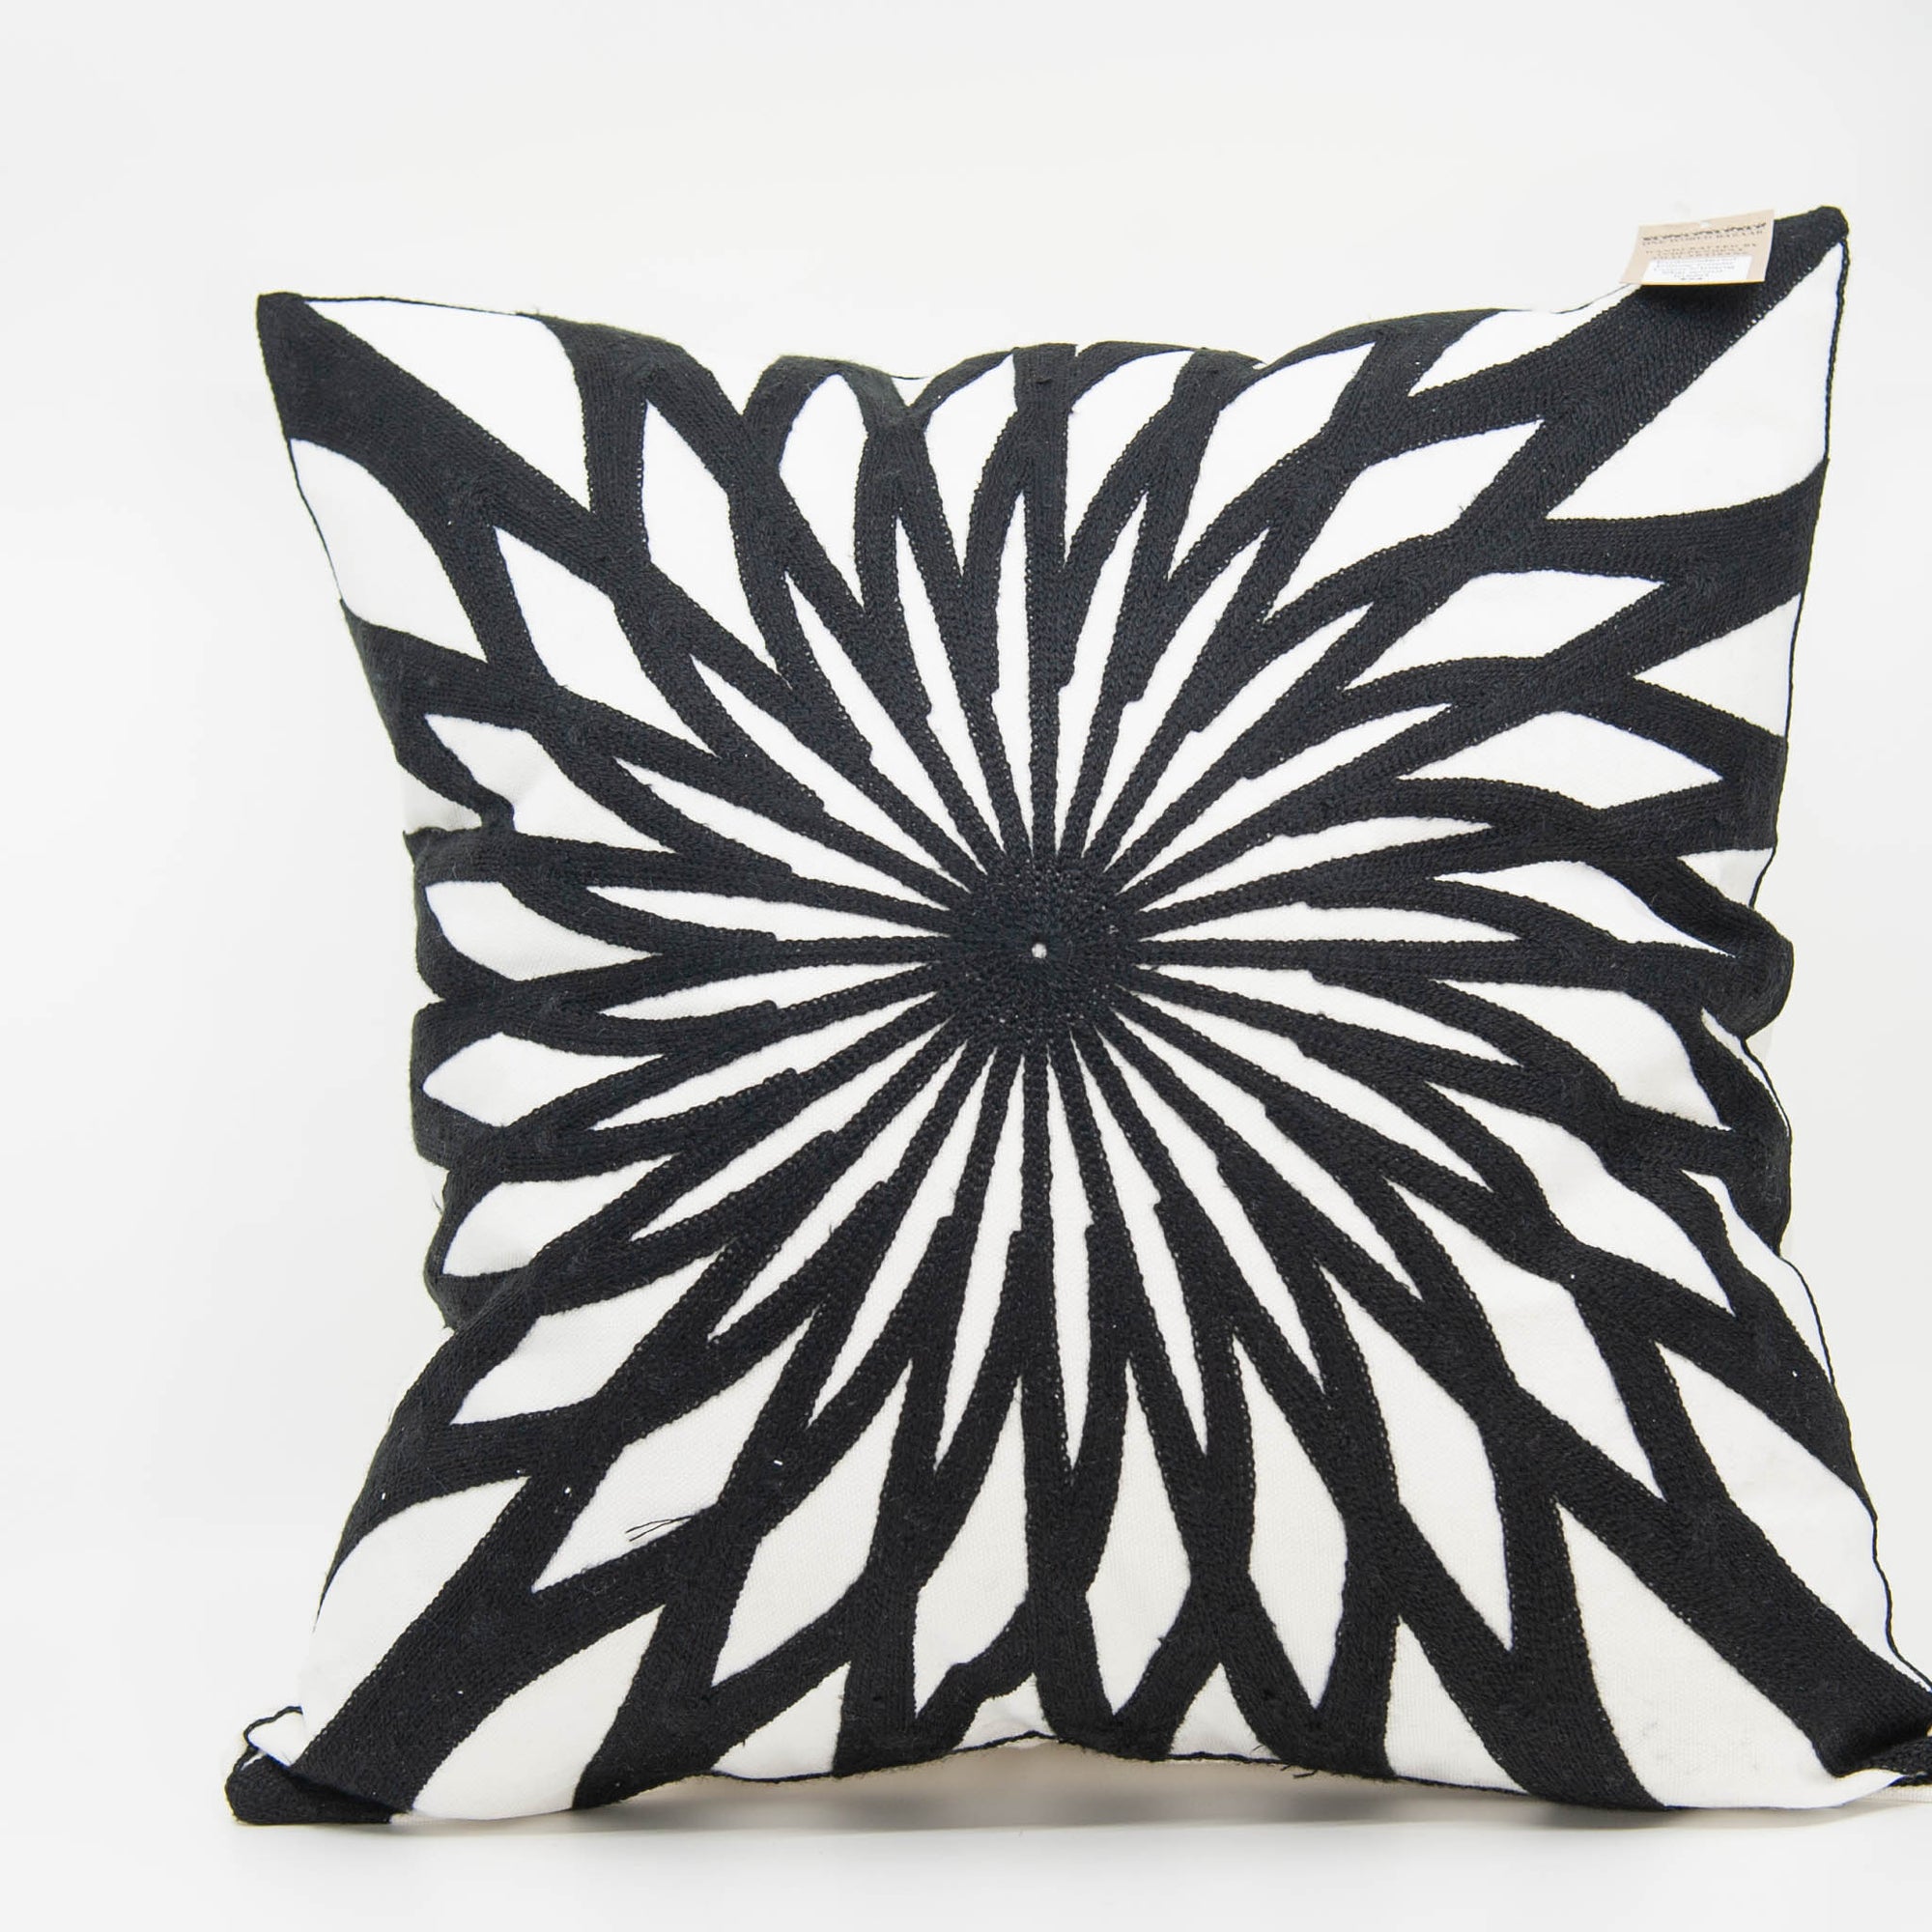 Embroidered Pillow Cover - Black Pattern